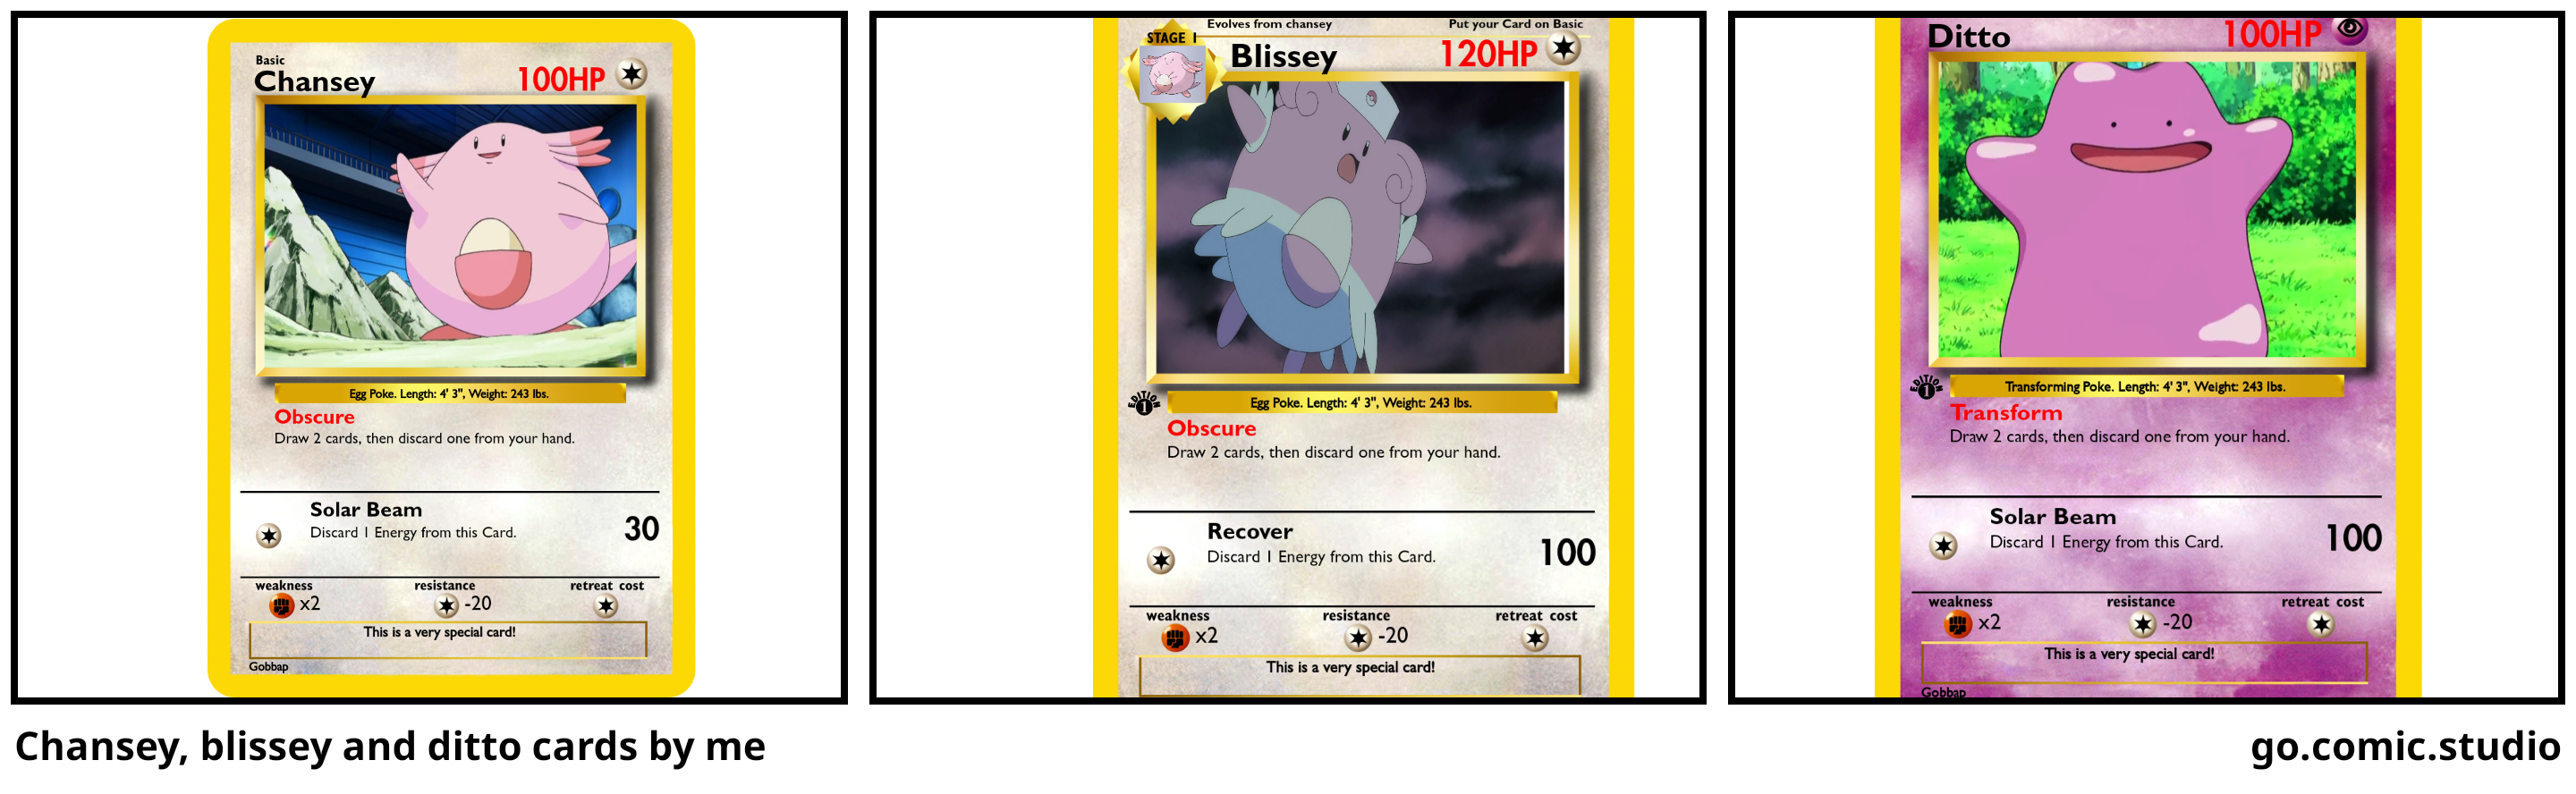 Chansey, blissey and ditto cards by me